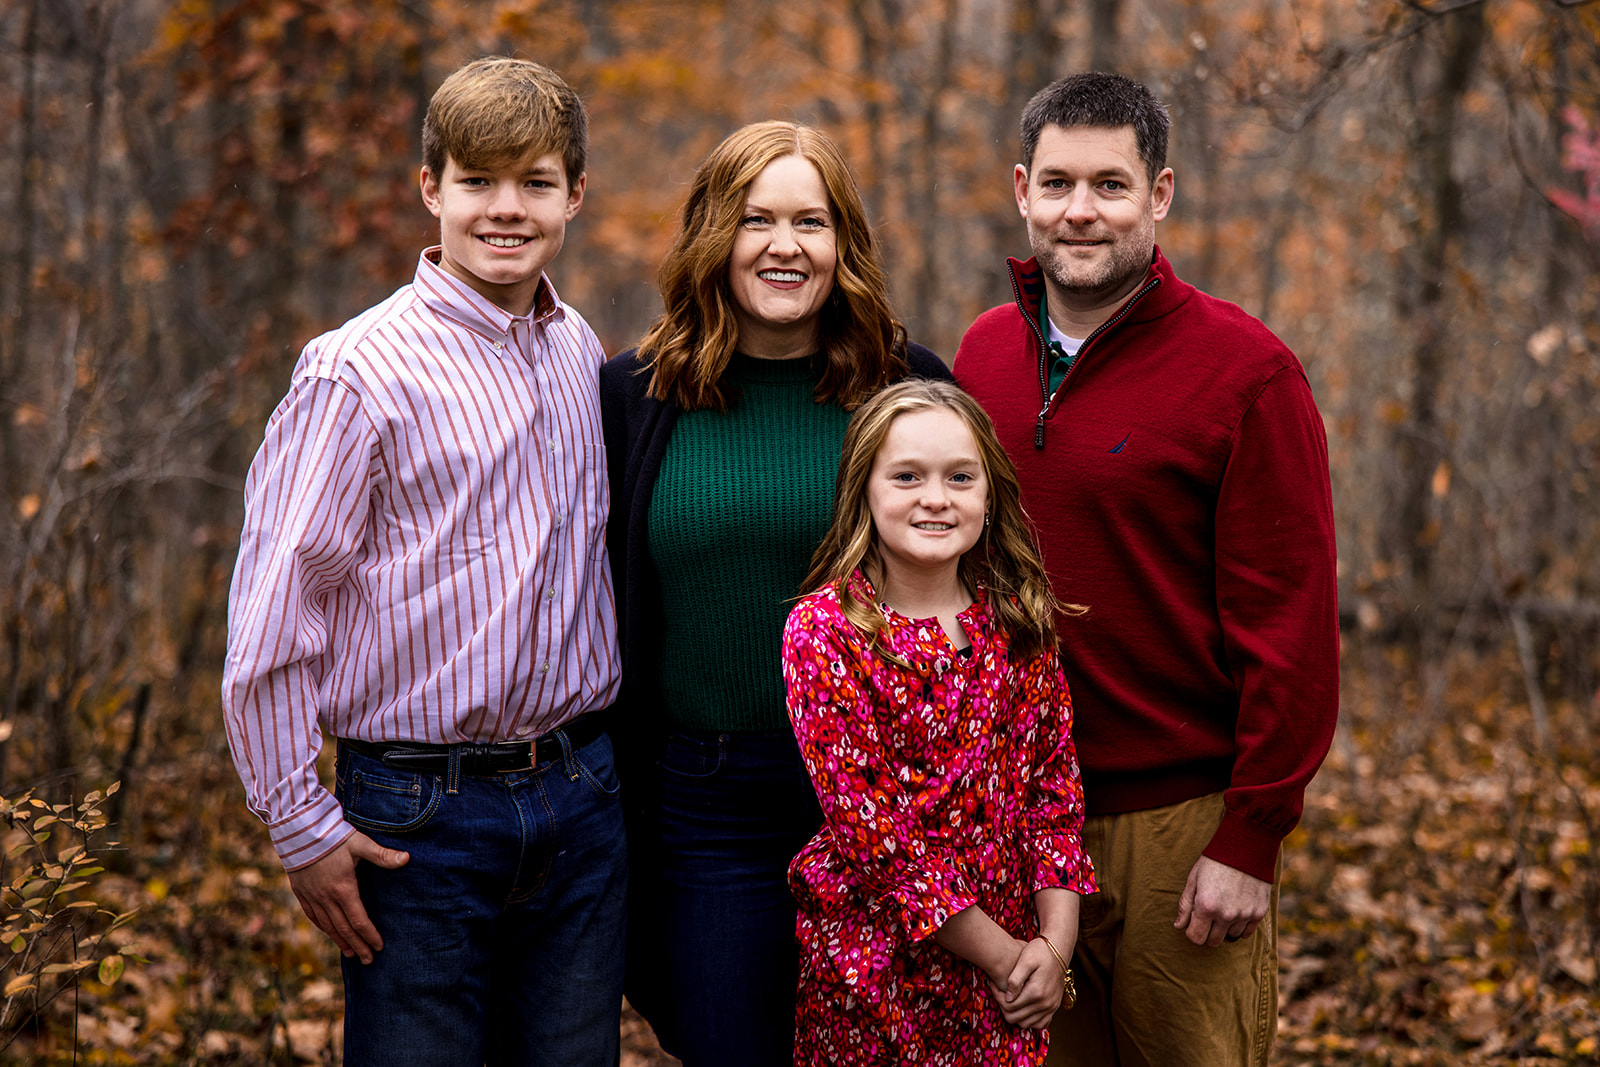 Falling Leaves, Loving Smiles: West Salem Family Photos by Jeff Wiswell of J.L. Wiswell Photography of Onalaska, WI